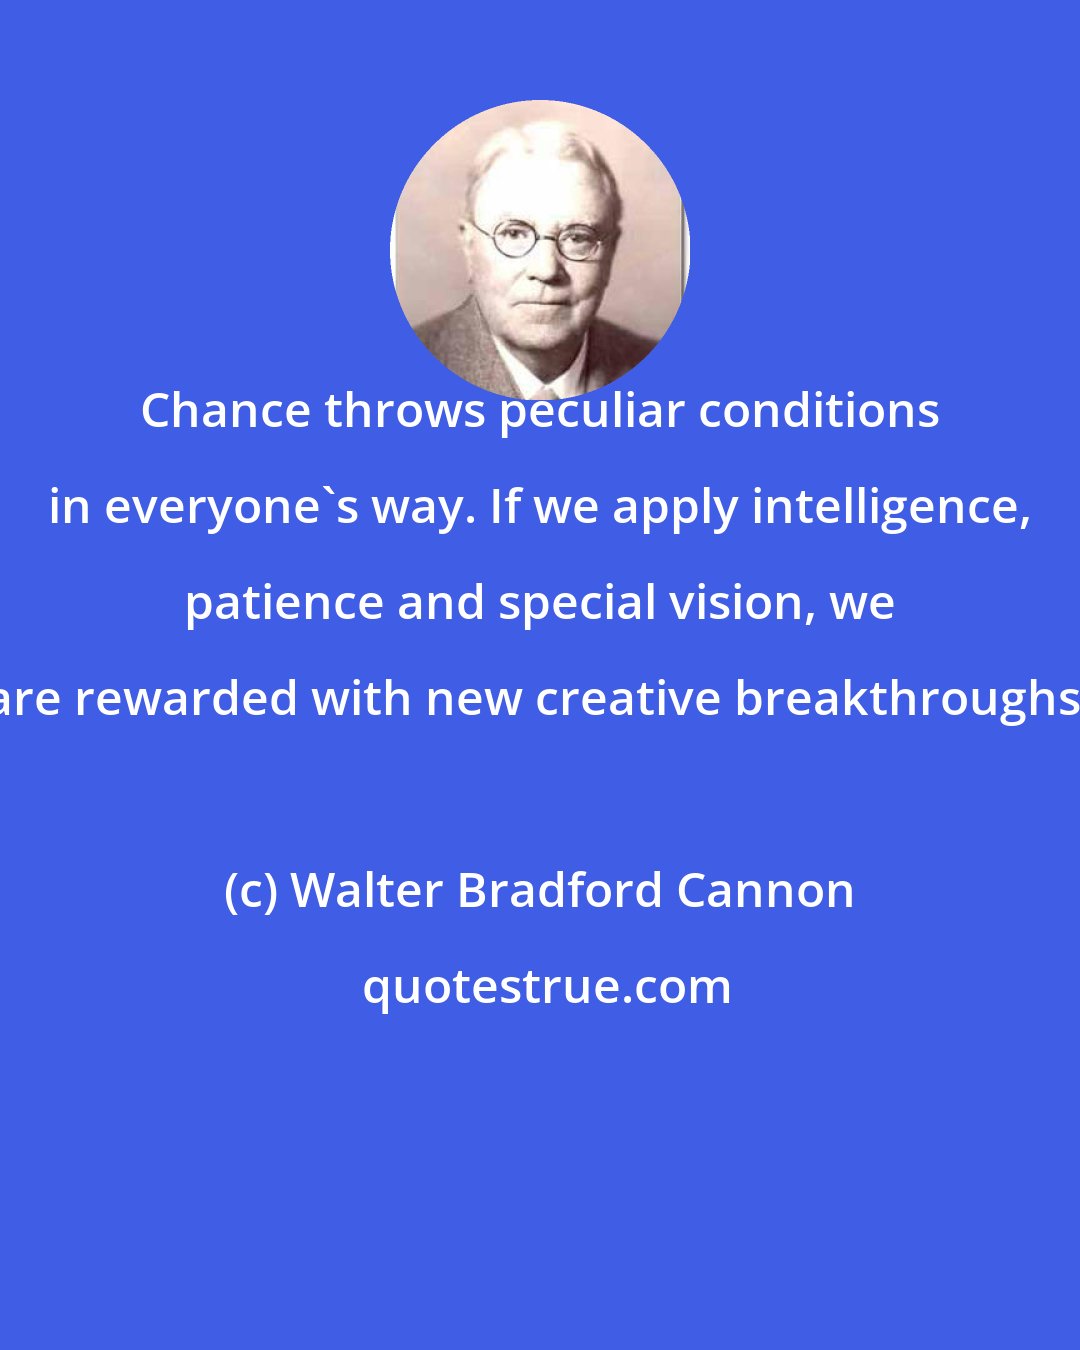 Walter Bradford Cannon: Chance throws peculiar conditions in everyone's way. If we apply intelligence, patience and special vision, we are rewarded with new creative breakthroughs.